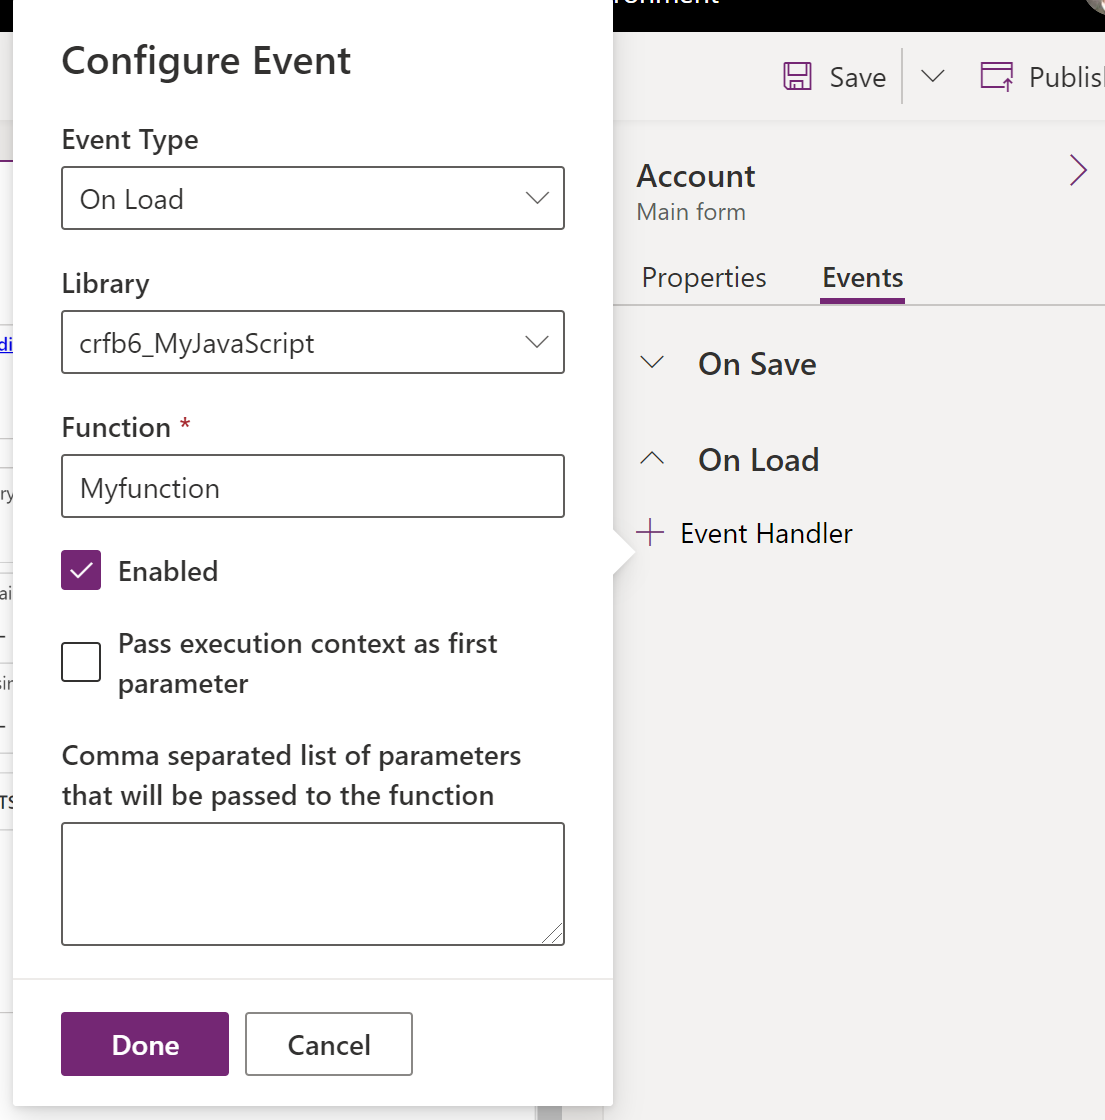 Configure the event for the form.